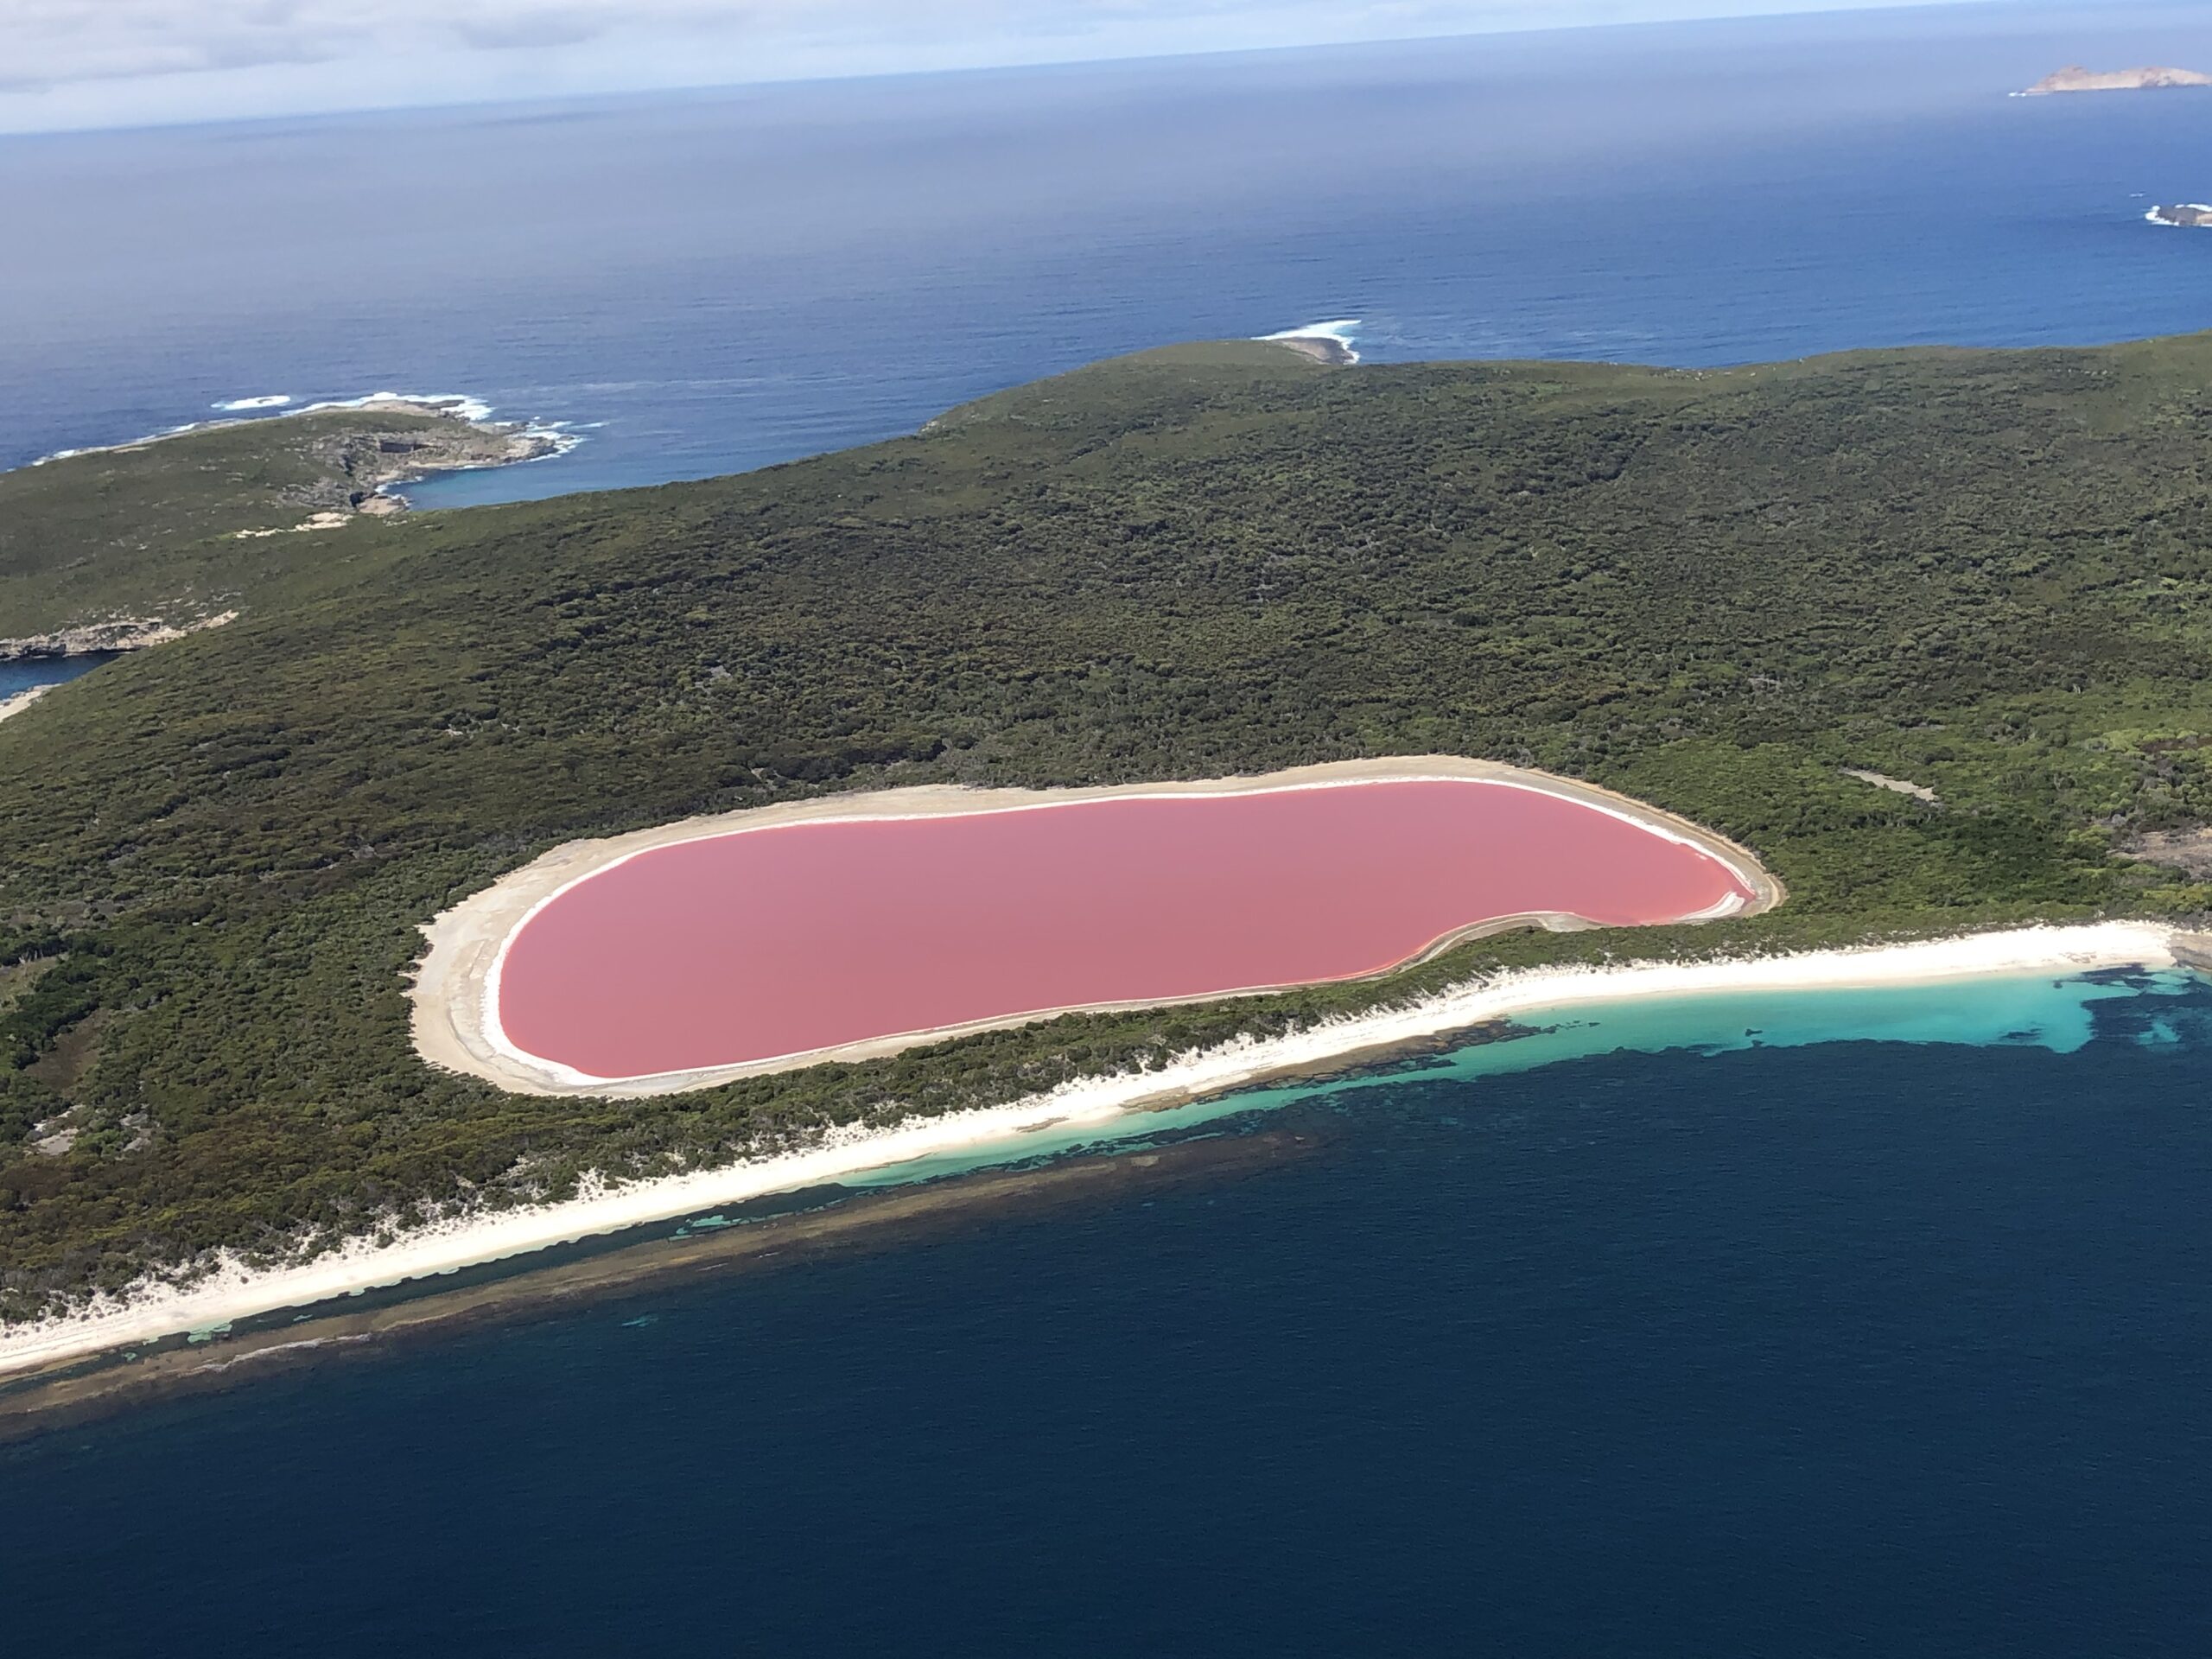 lake hillier helicopter tour price